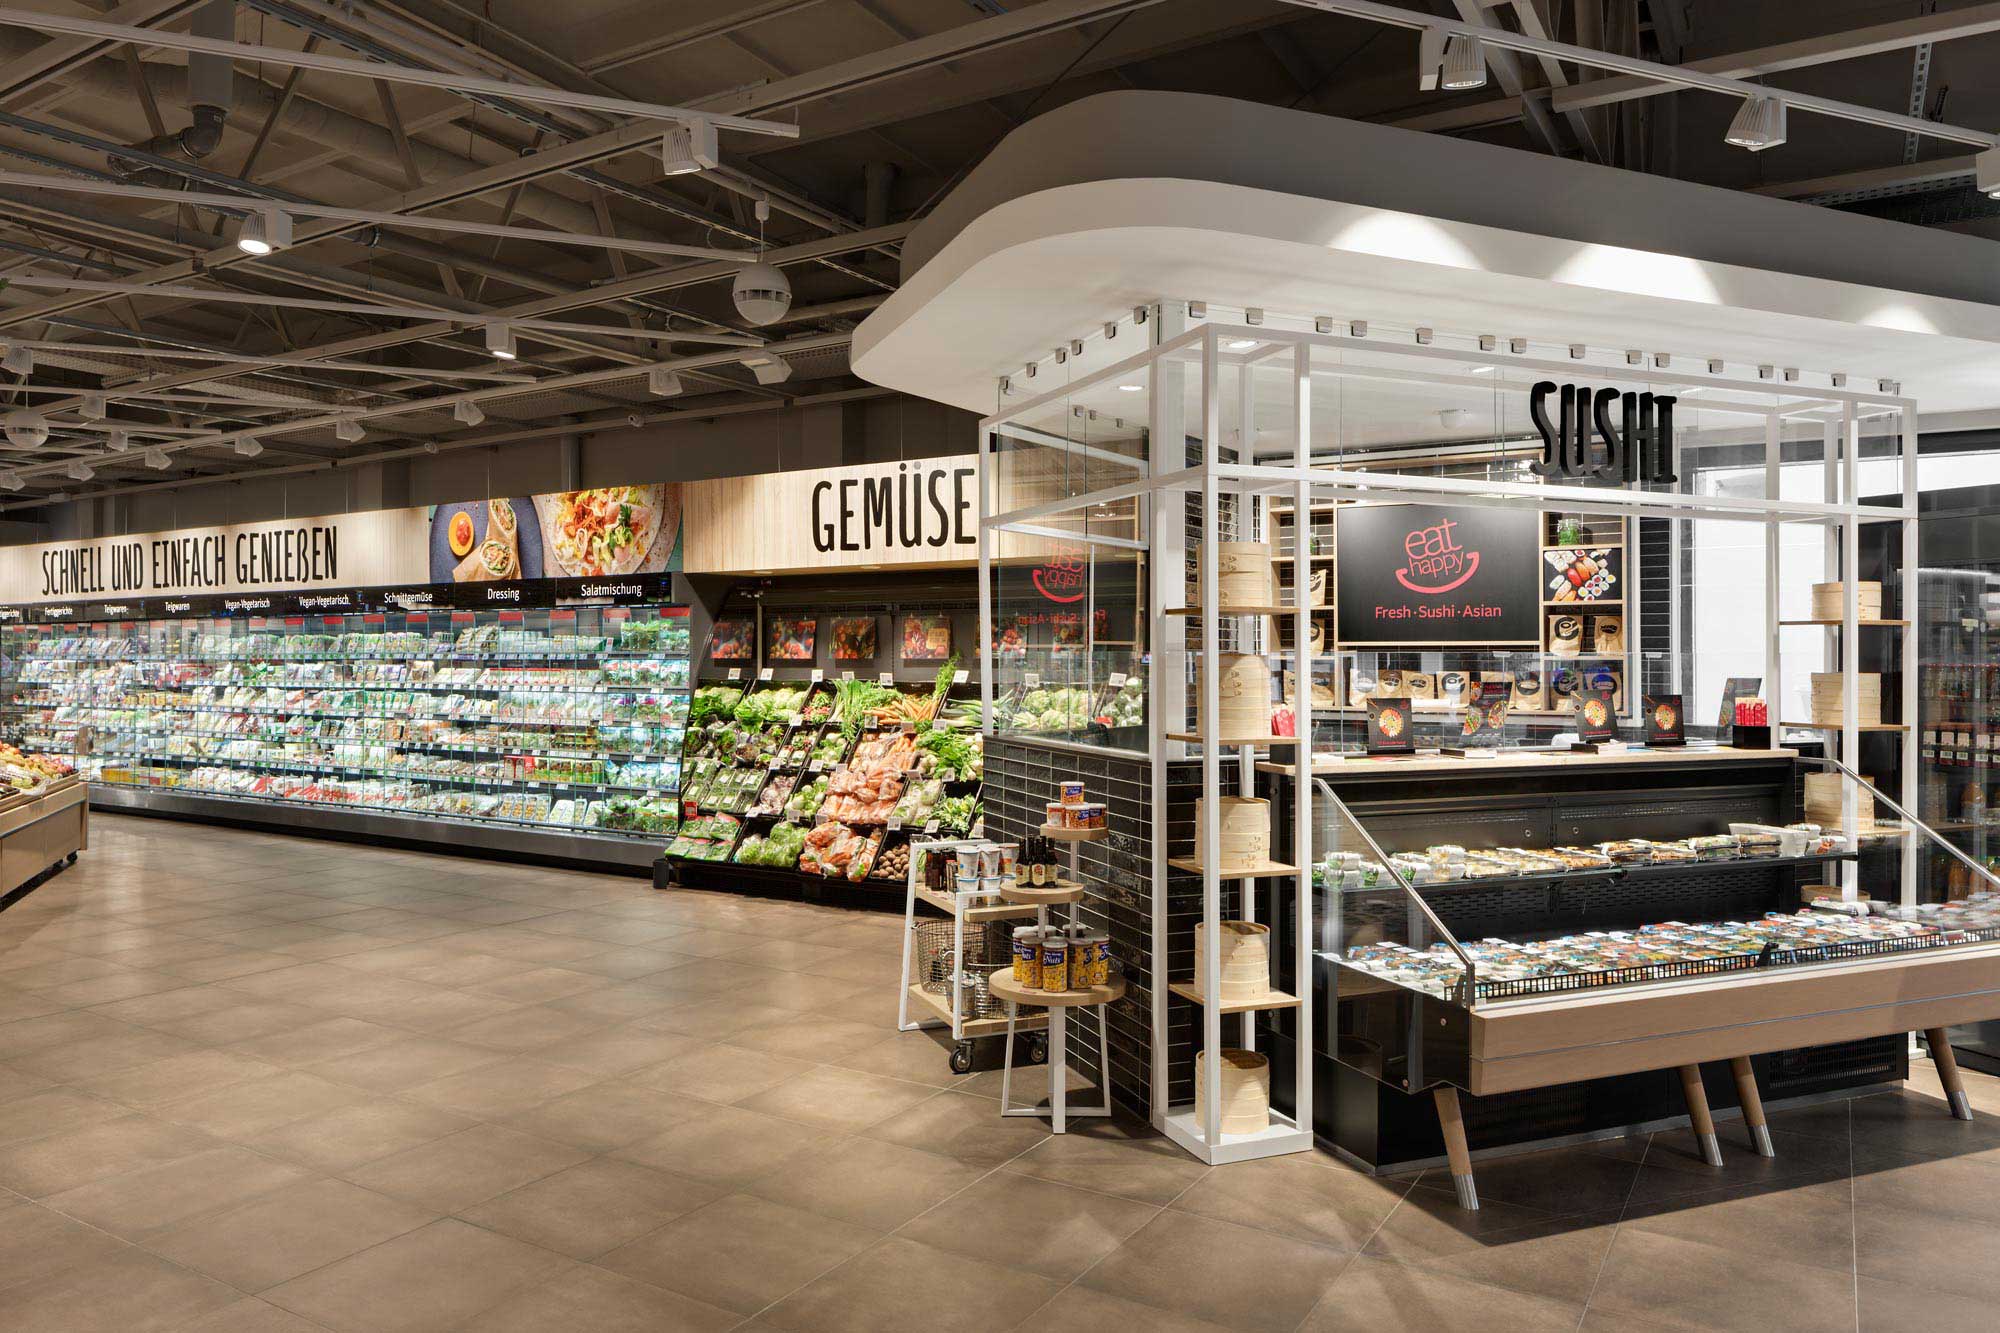 Hypermarket design at REWE, Germany Sushi and ready to eat meal solutions department